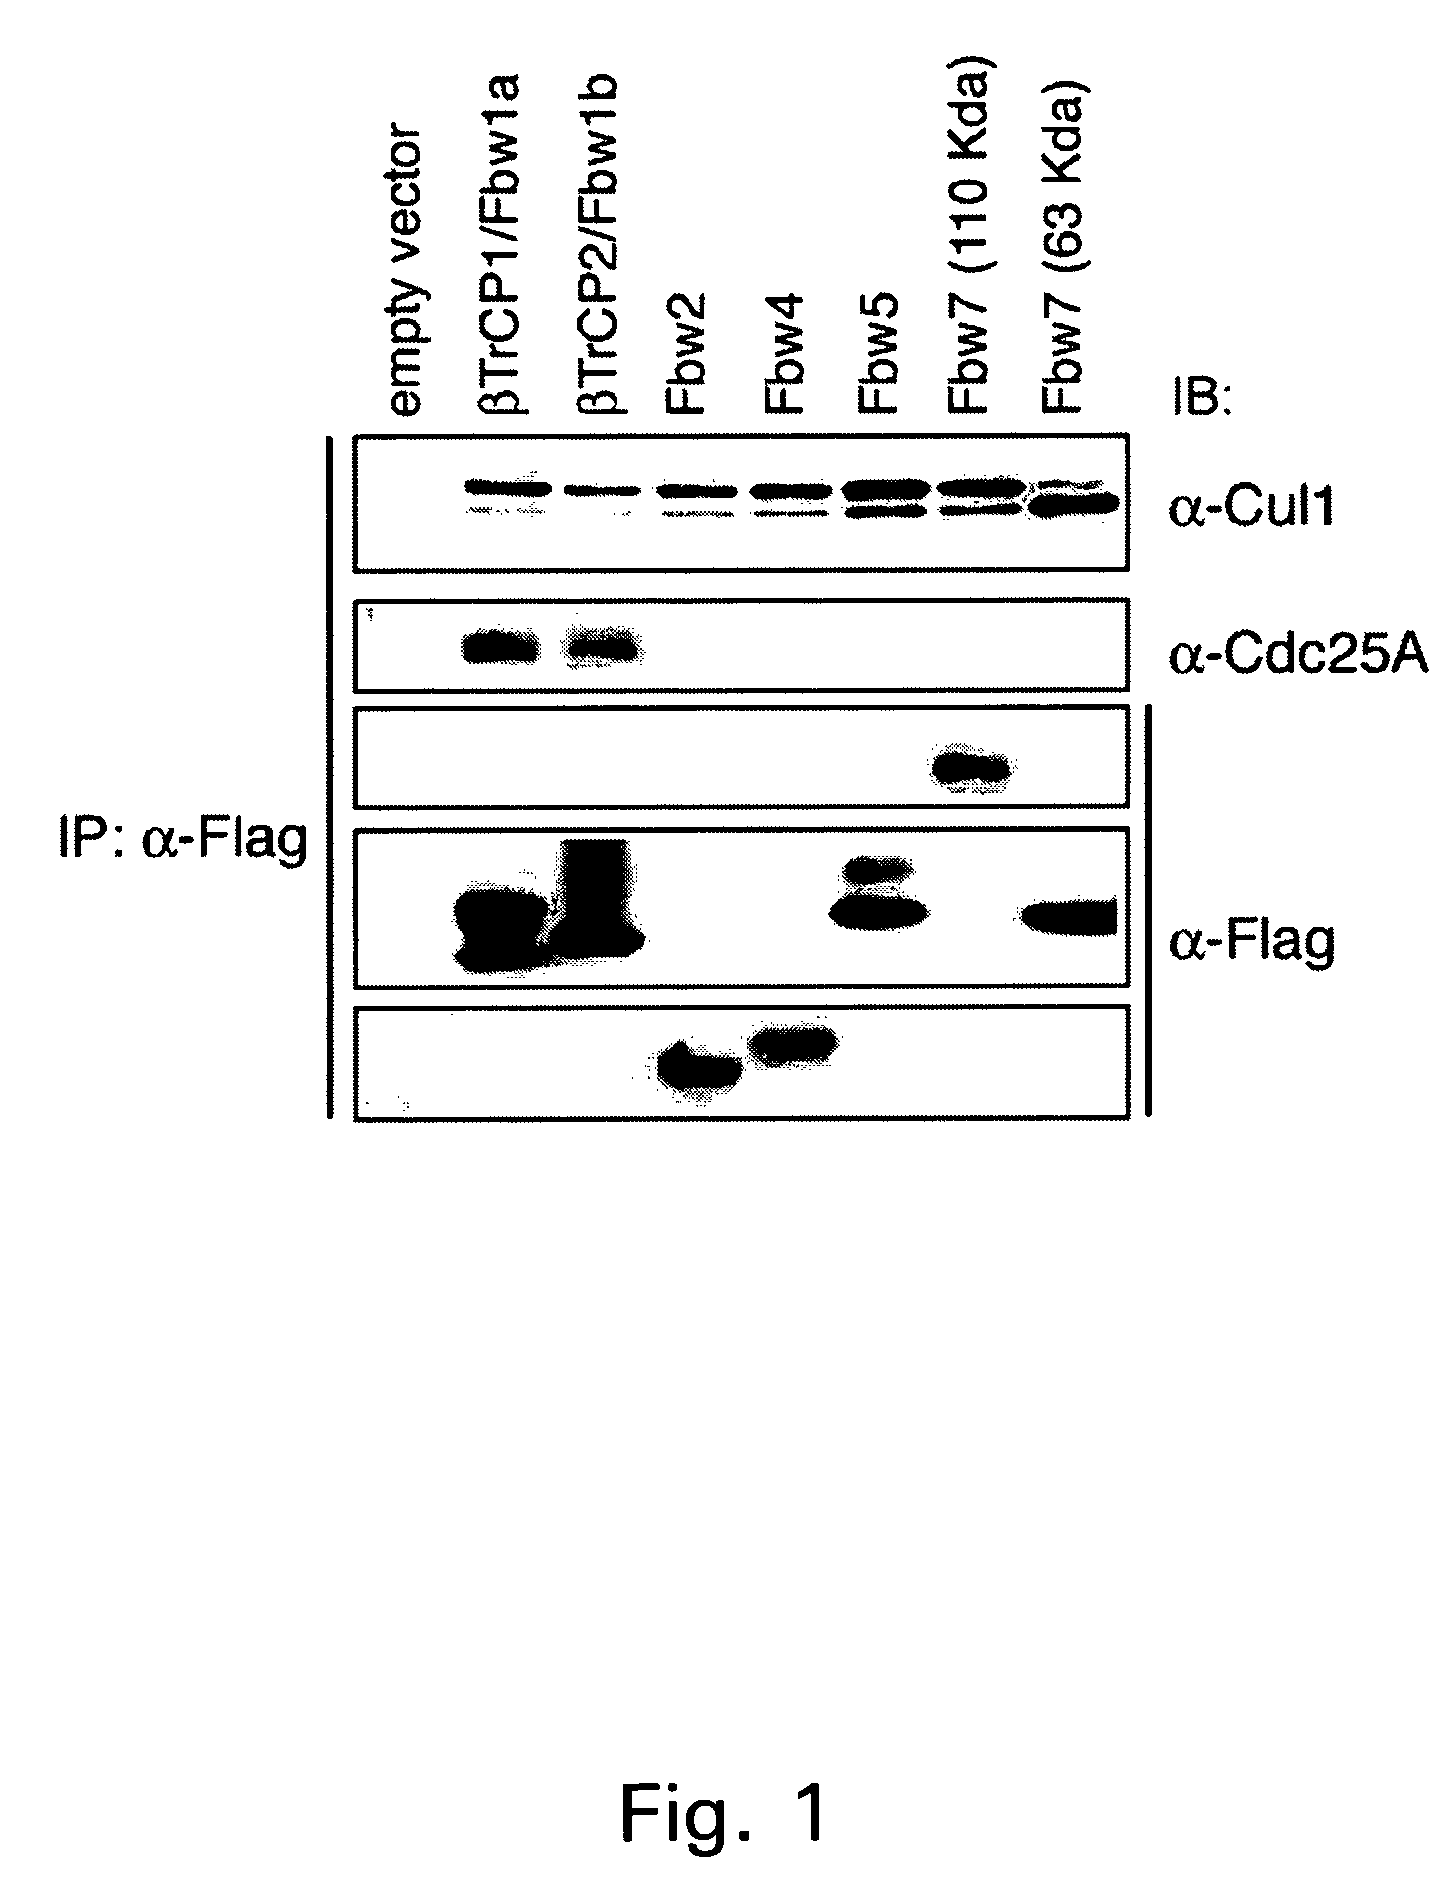 Methods to identify compounds useful for tumor sensitization to DNA damage